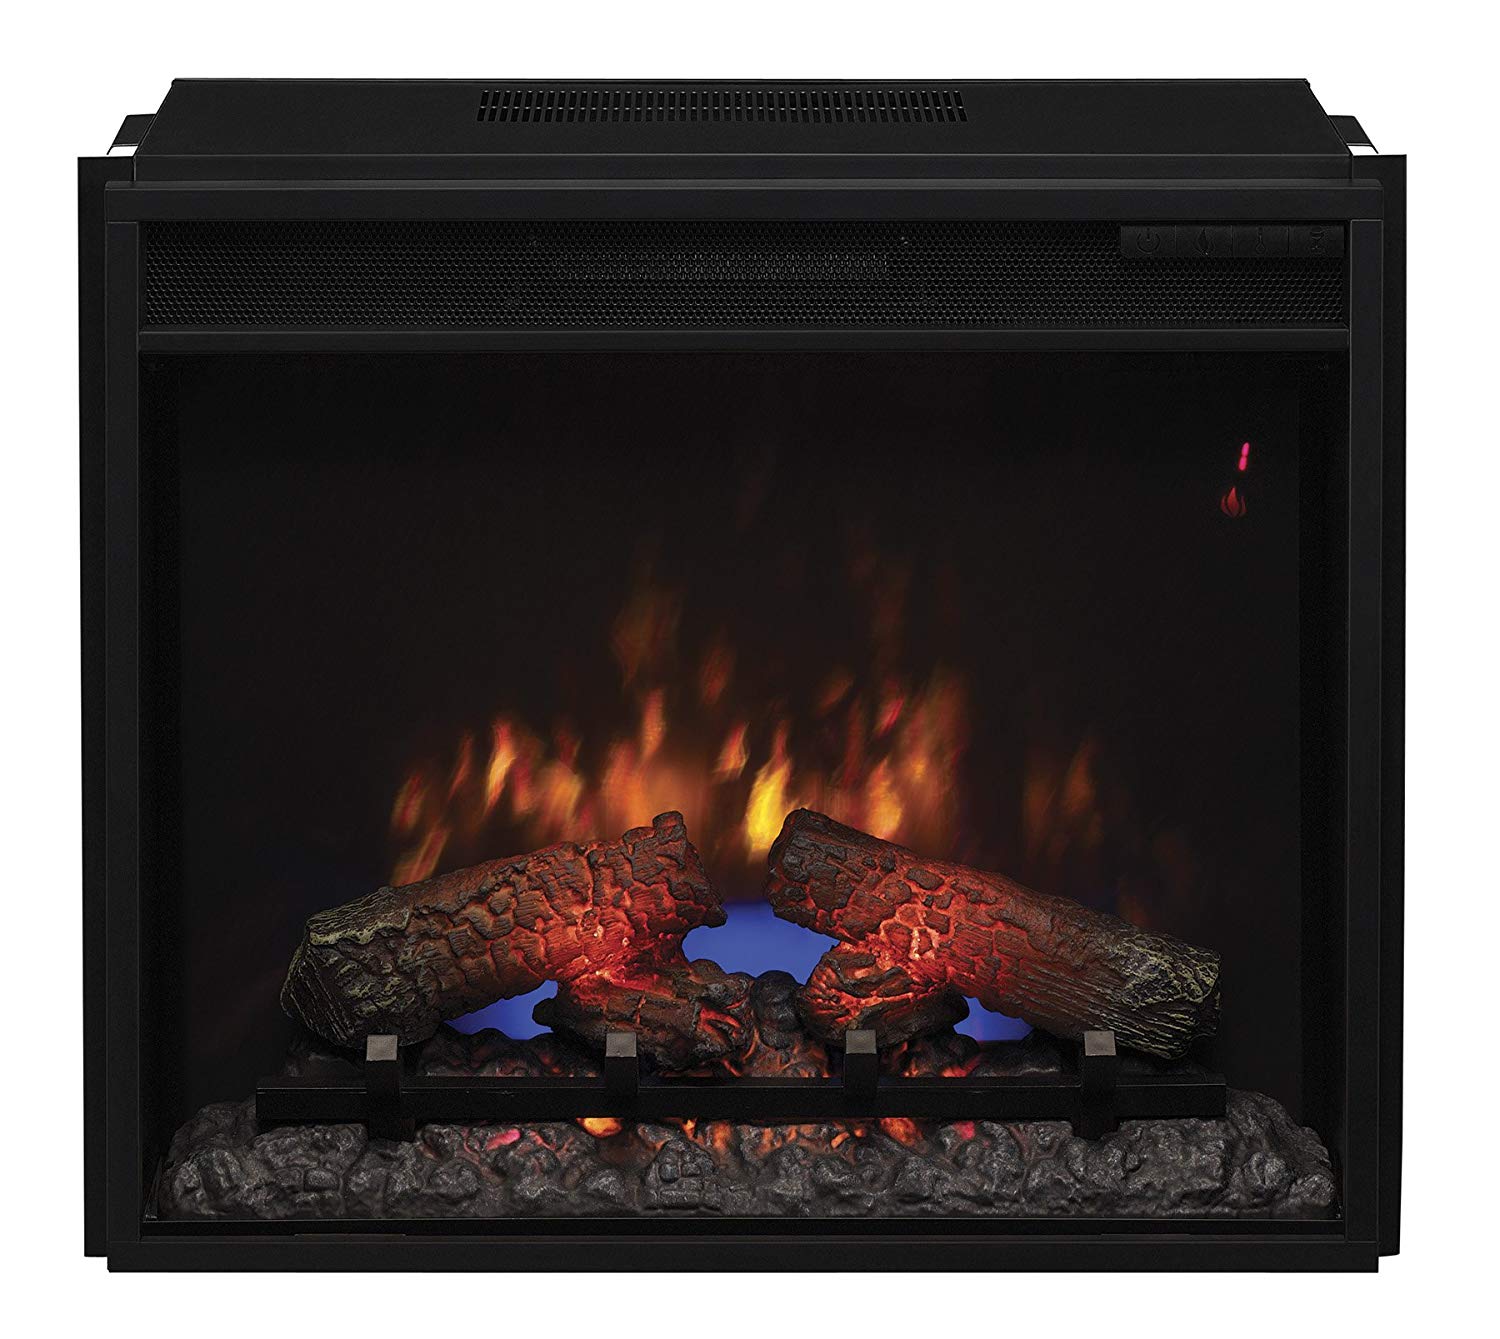 Small Corner Electric Fireplace Elegant Classicflame 23ef031grp 23" Electric Fireplace Insert with Safer Plug